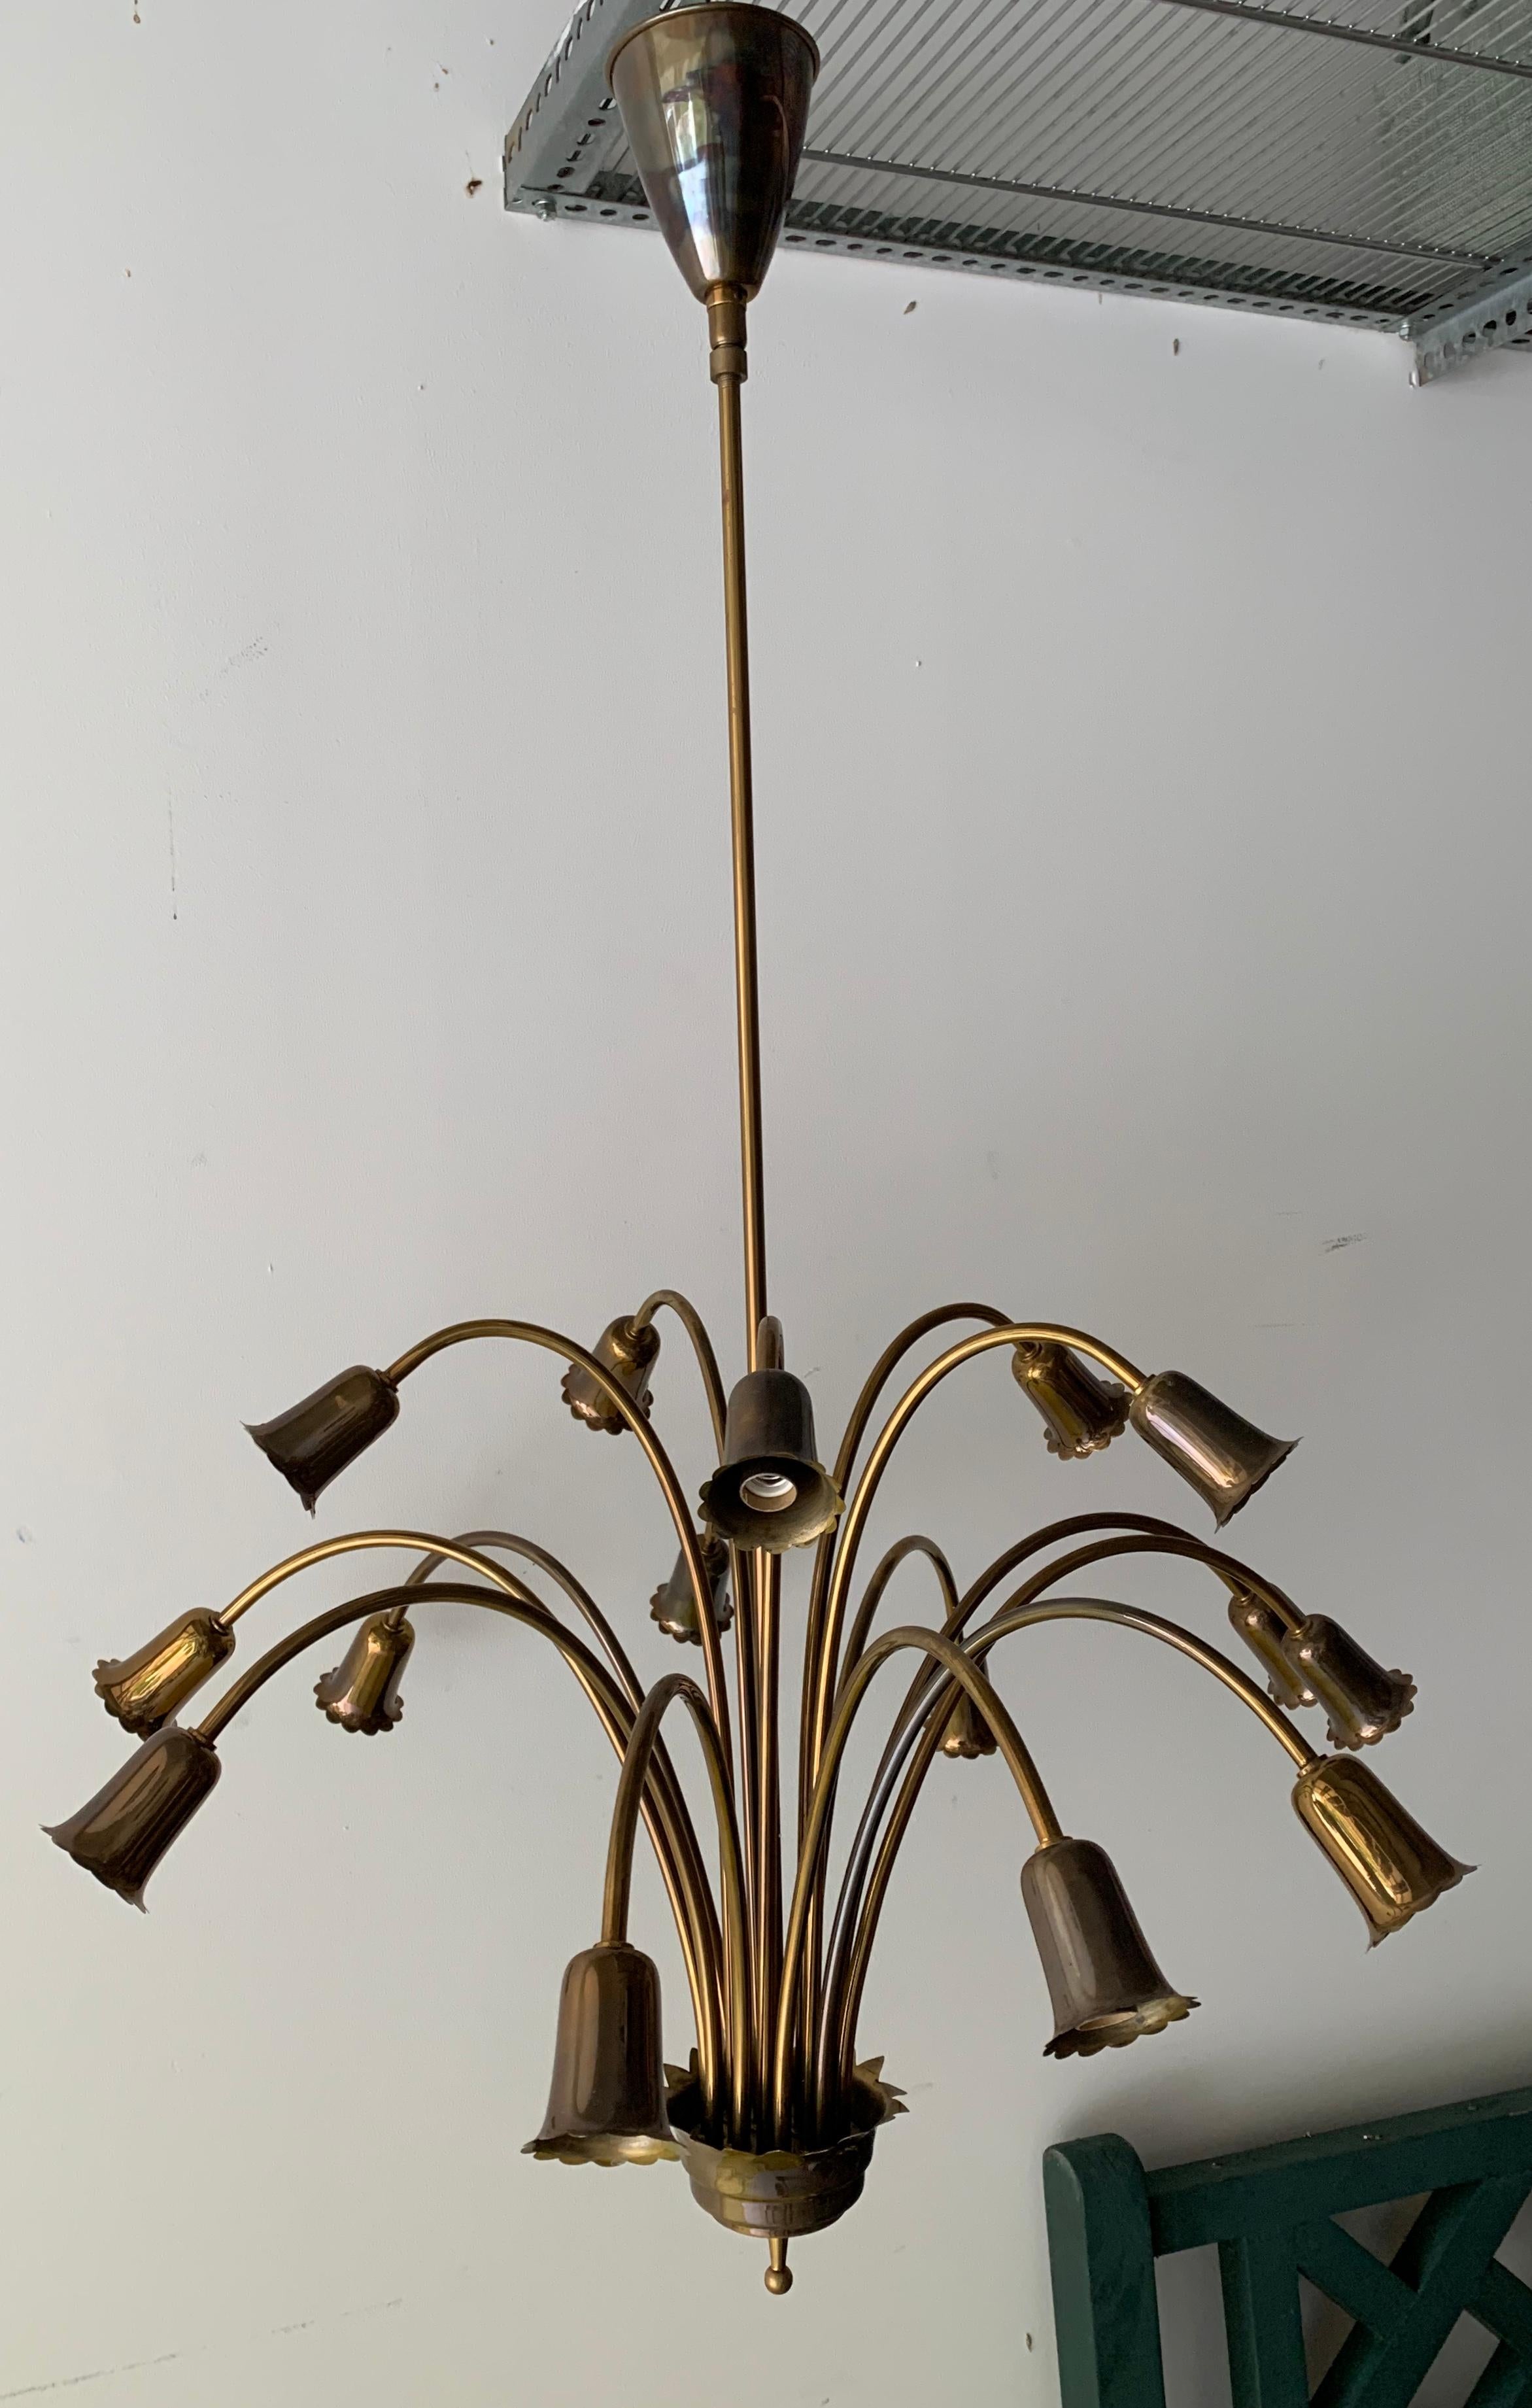 A period midcentury brass chandelier with 15 arms. 

In the style of Stilnovo.

Beautiful dark brass patina.

Measures: Total drop height, 27.5 inches
Height without stem/canopy, 18 inches
Width, 26 inches.